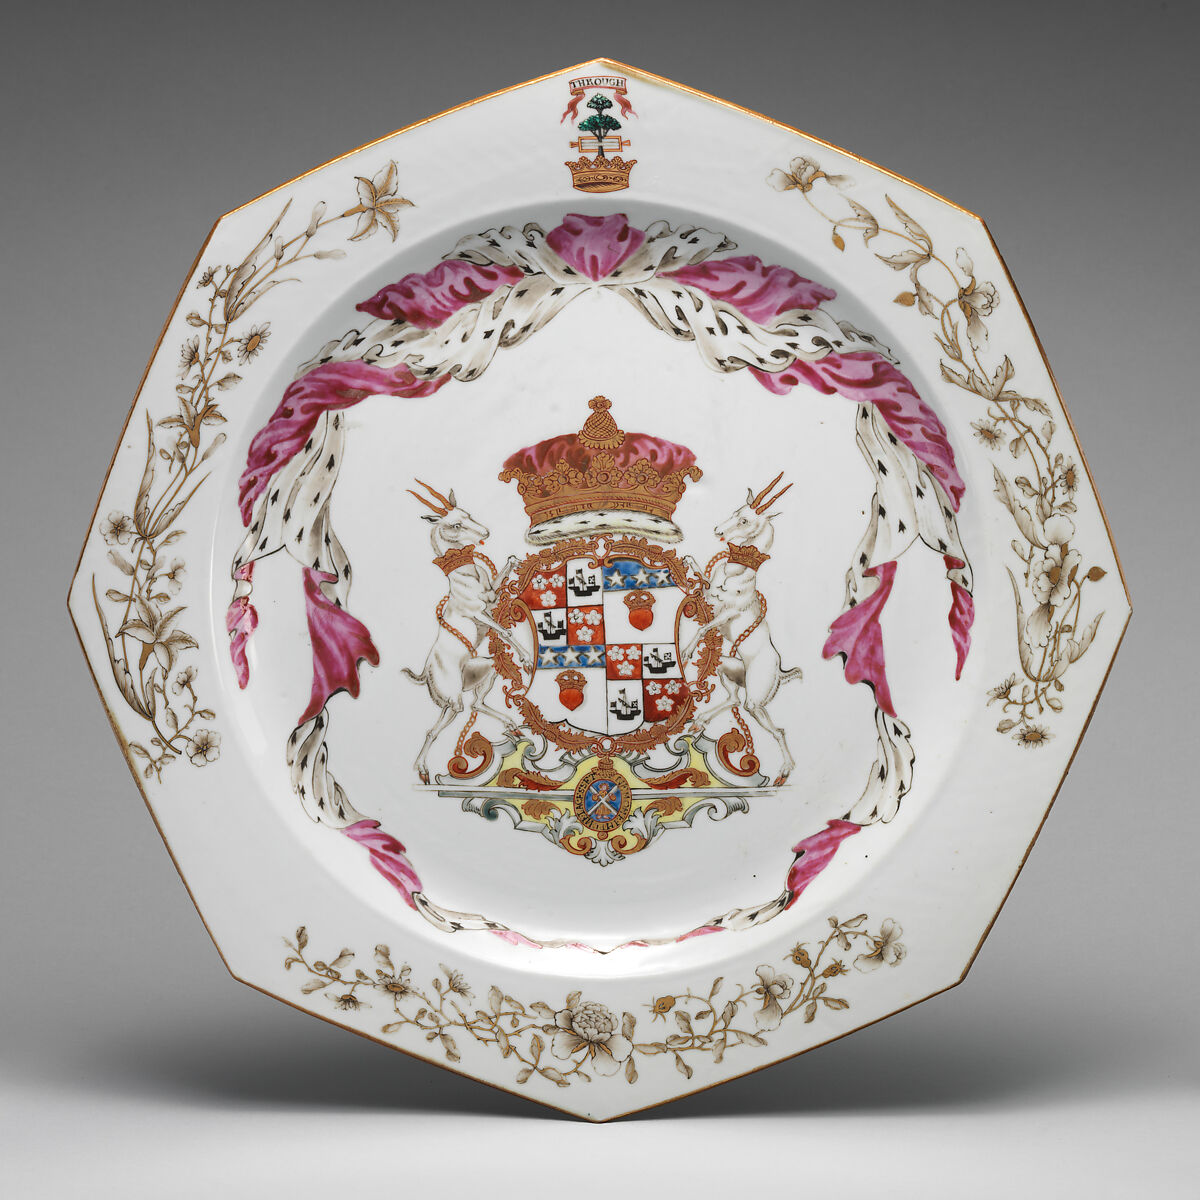 Dish (part of a service), Hard-paste porcelain, Chinese, for Scottish market 